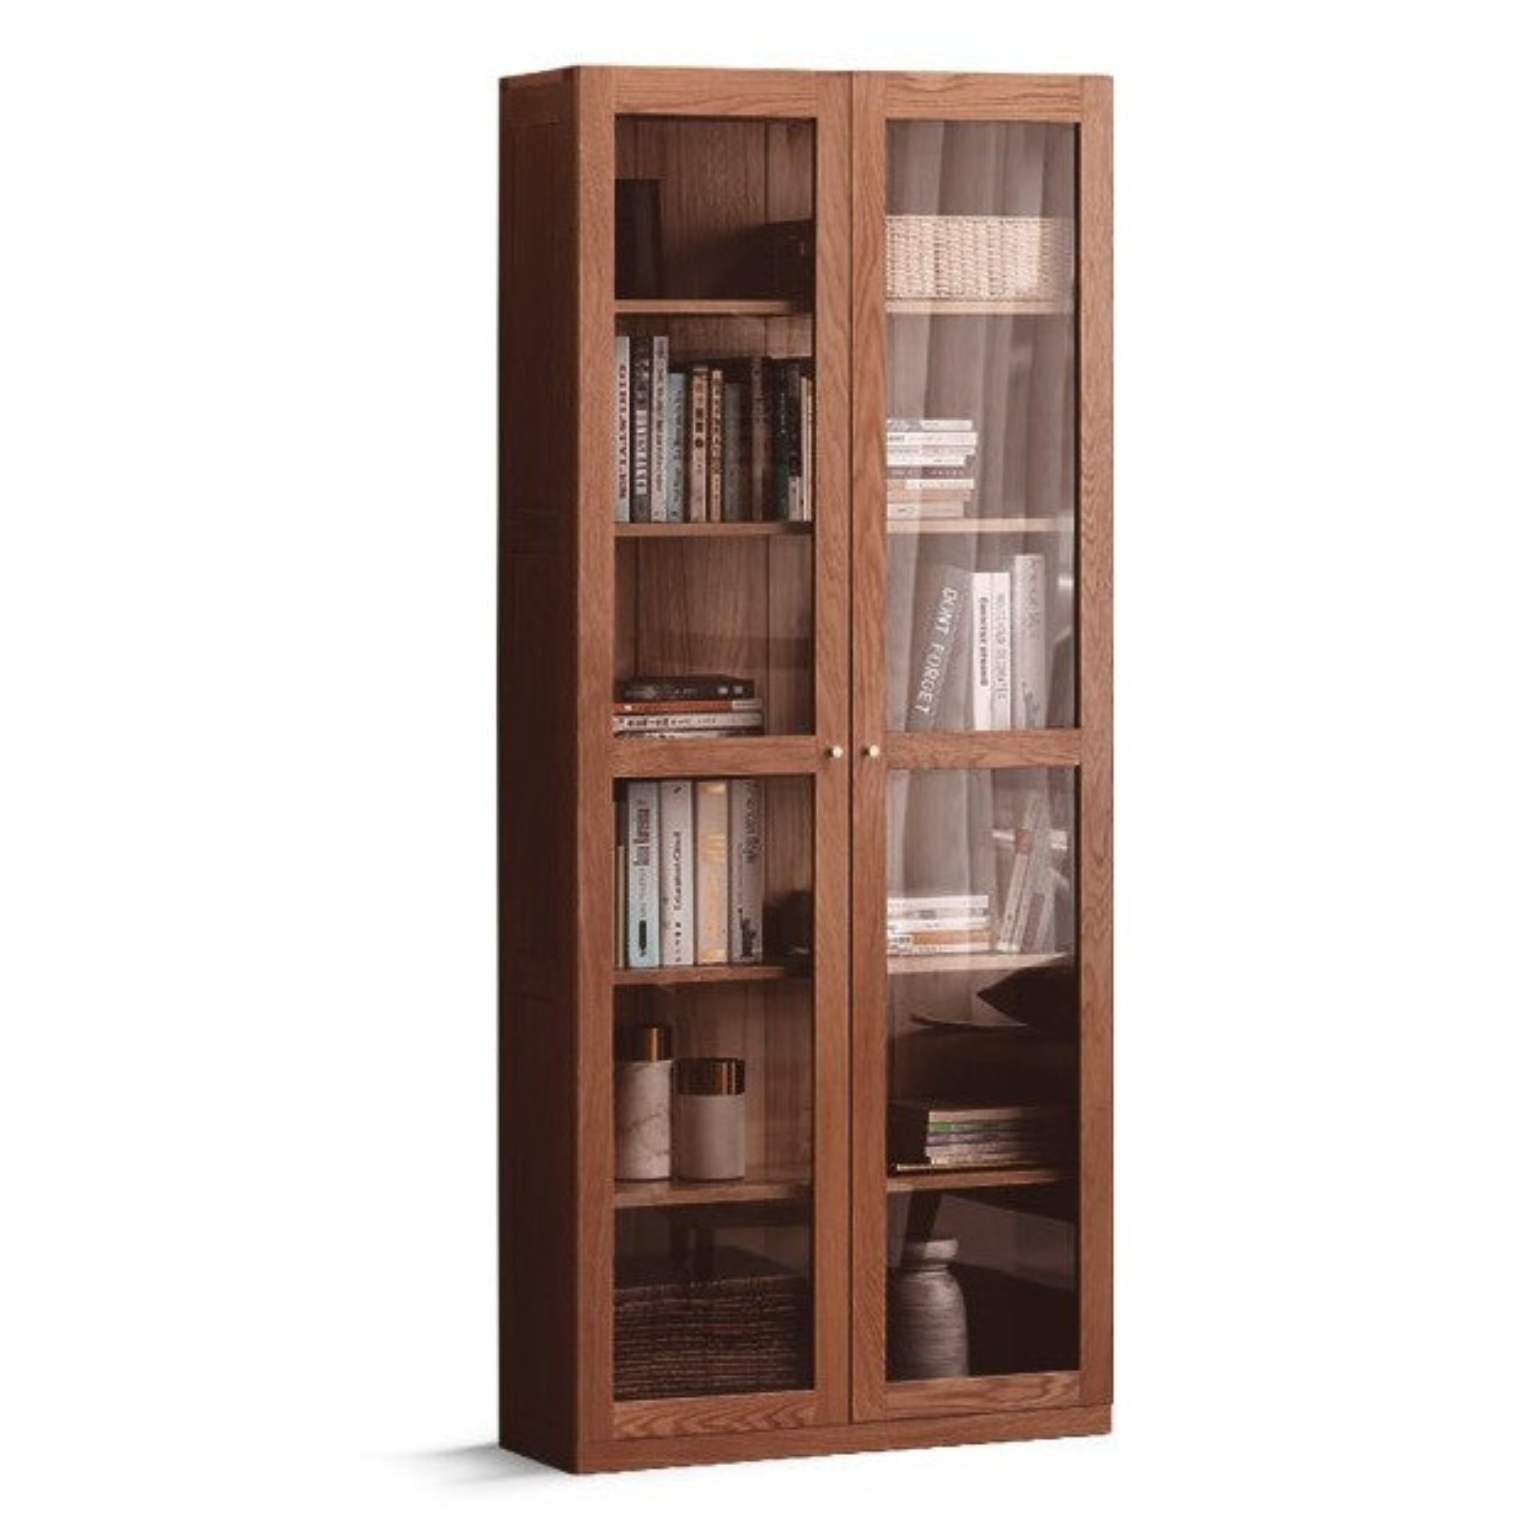 Oak solid wood bookcase modern with glass door -